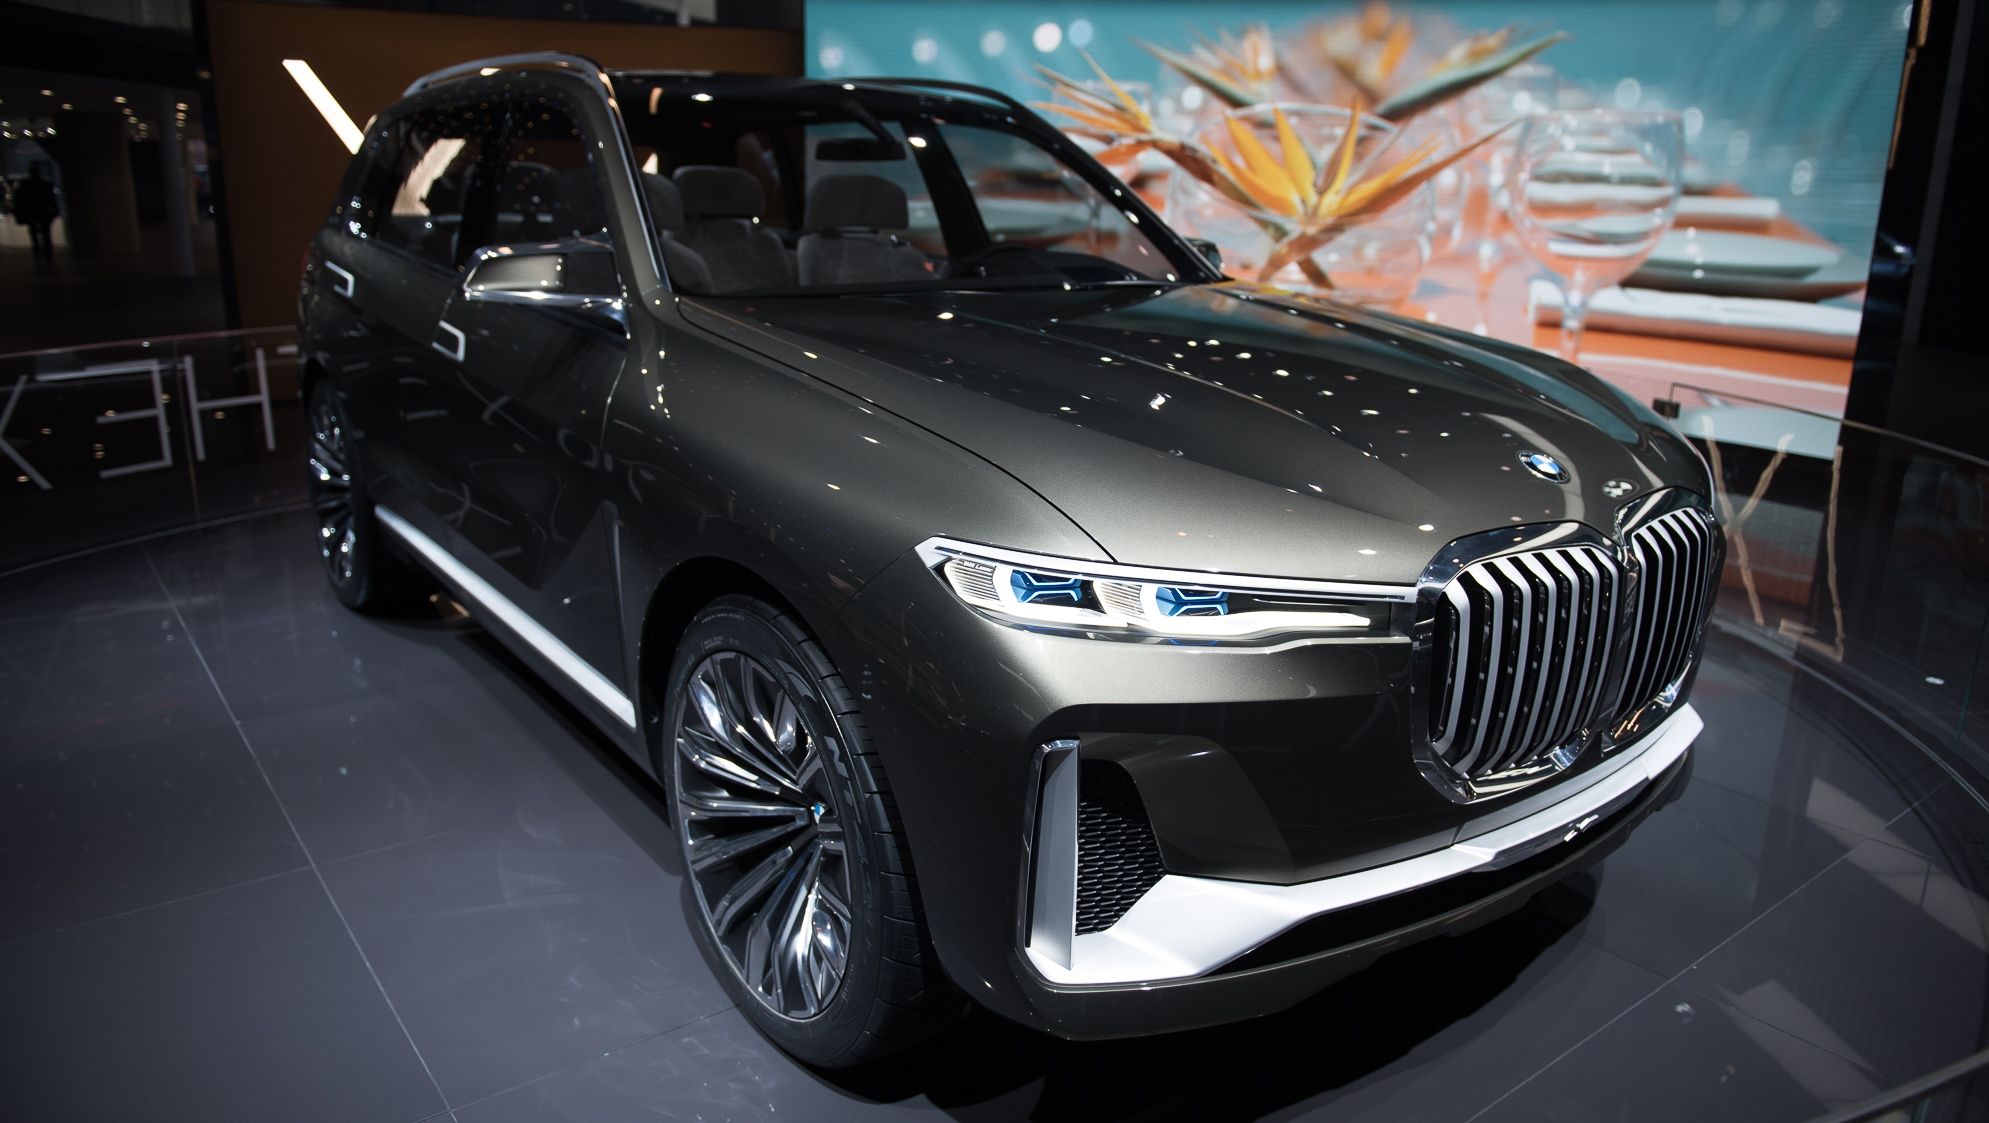 2019 BMW X8 to take on Audi Q8 and Range Rover Velar in 2020